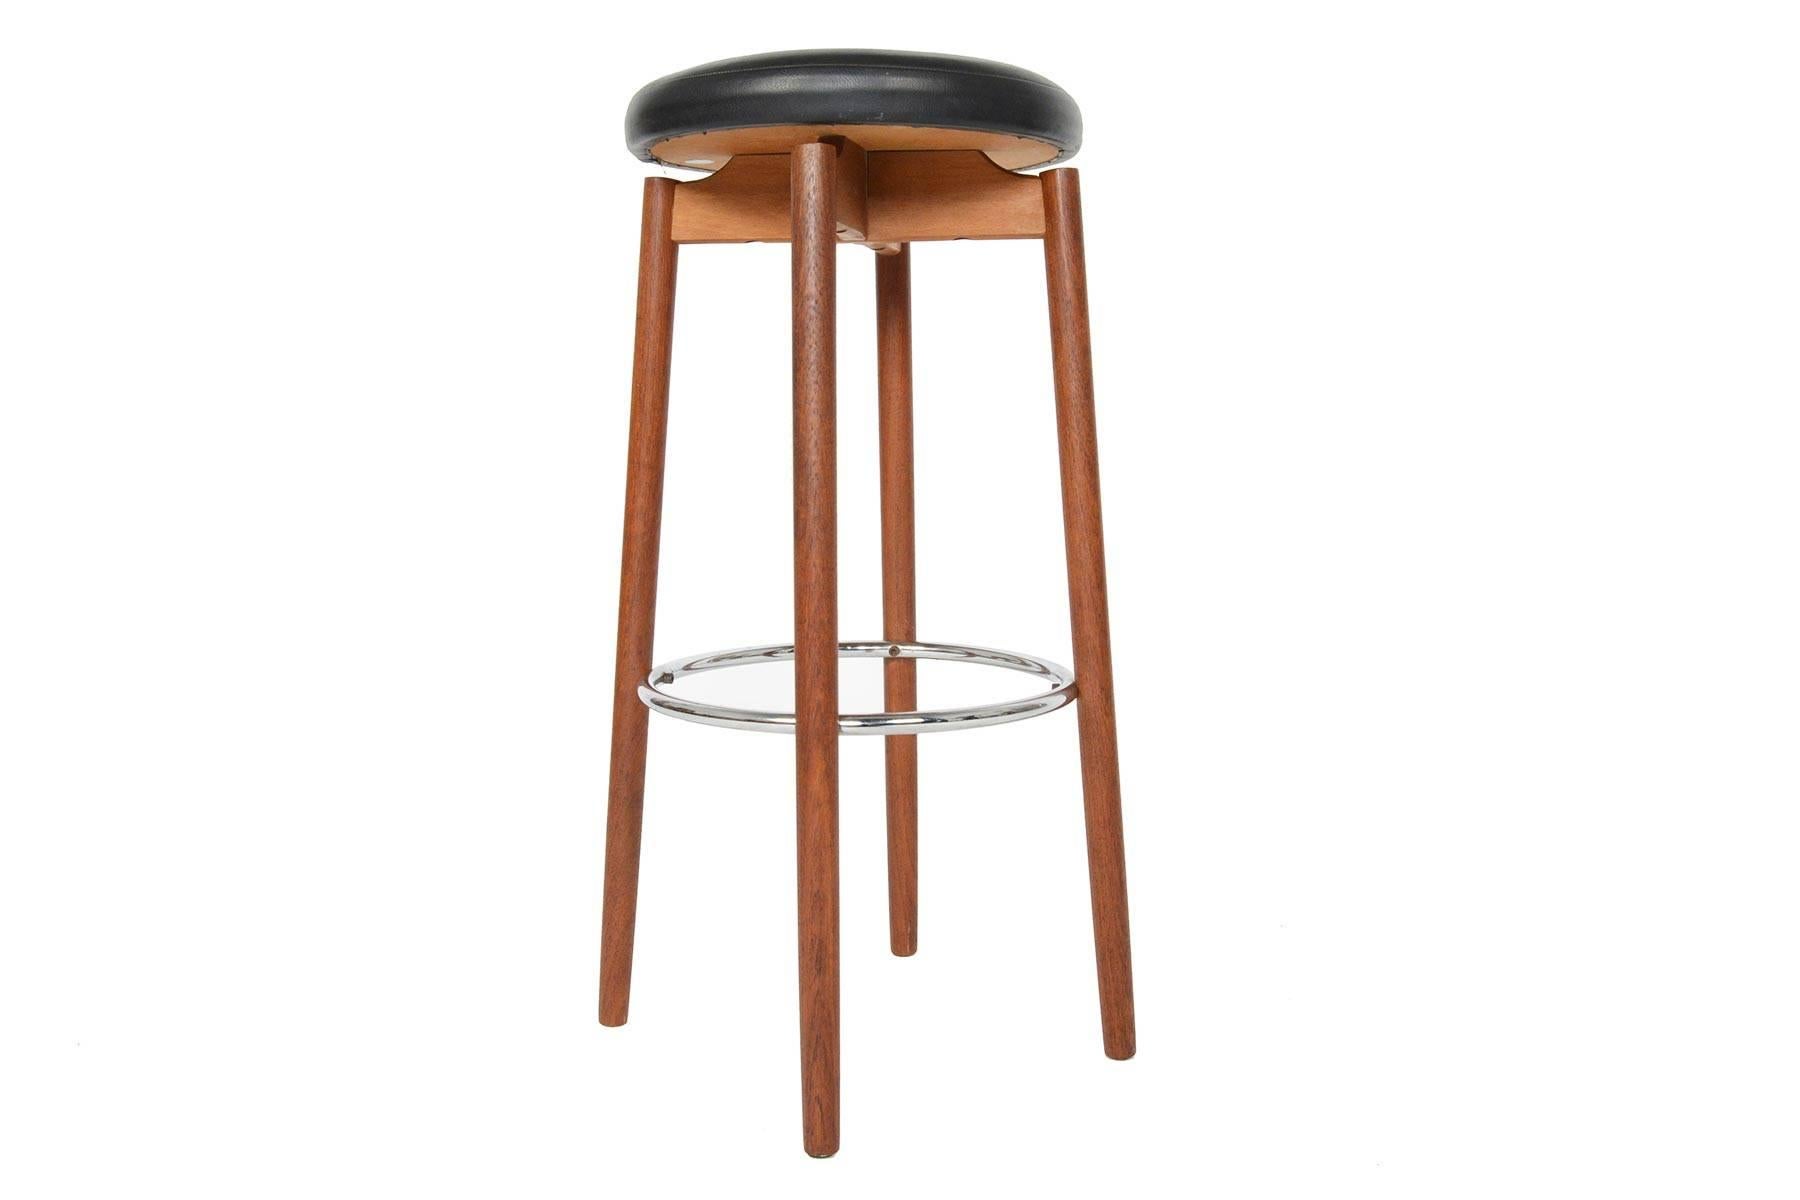 This phenomenal pair of hard to find barstools was manufactured by Hugo Frandsen in Spottrup, Denmark in the 1960s.  Long, elegant teak legs are accented by a floating seat covered in original vinyl.  Round chrome footrests add style and